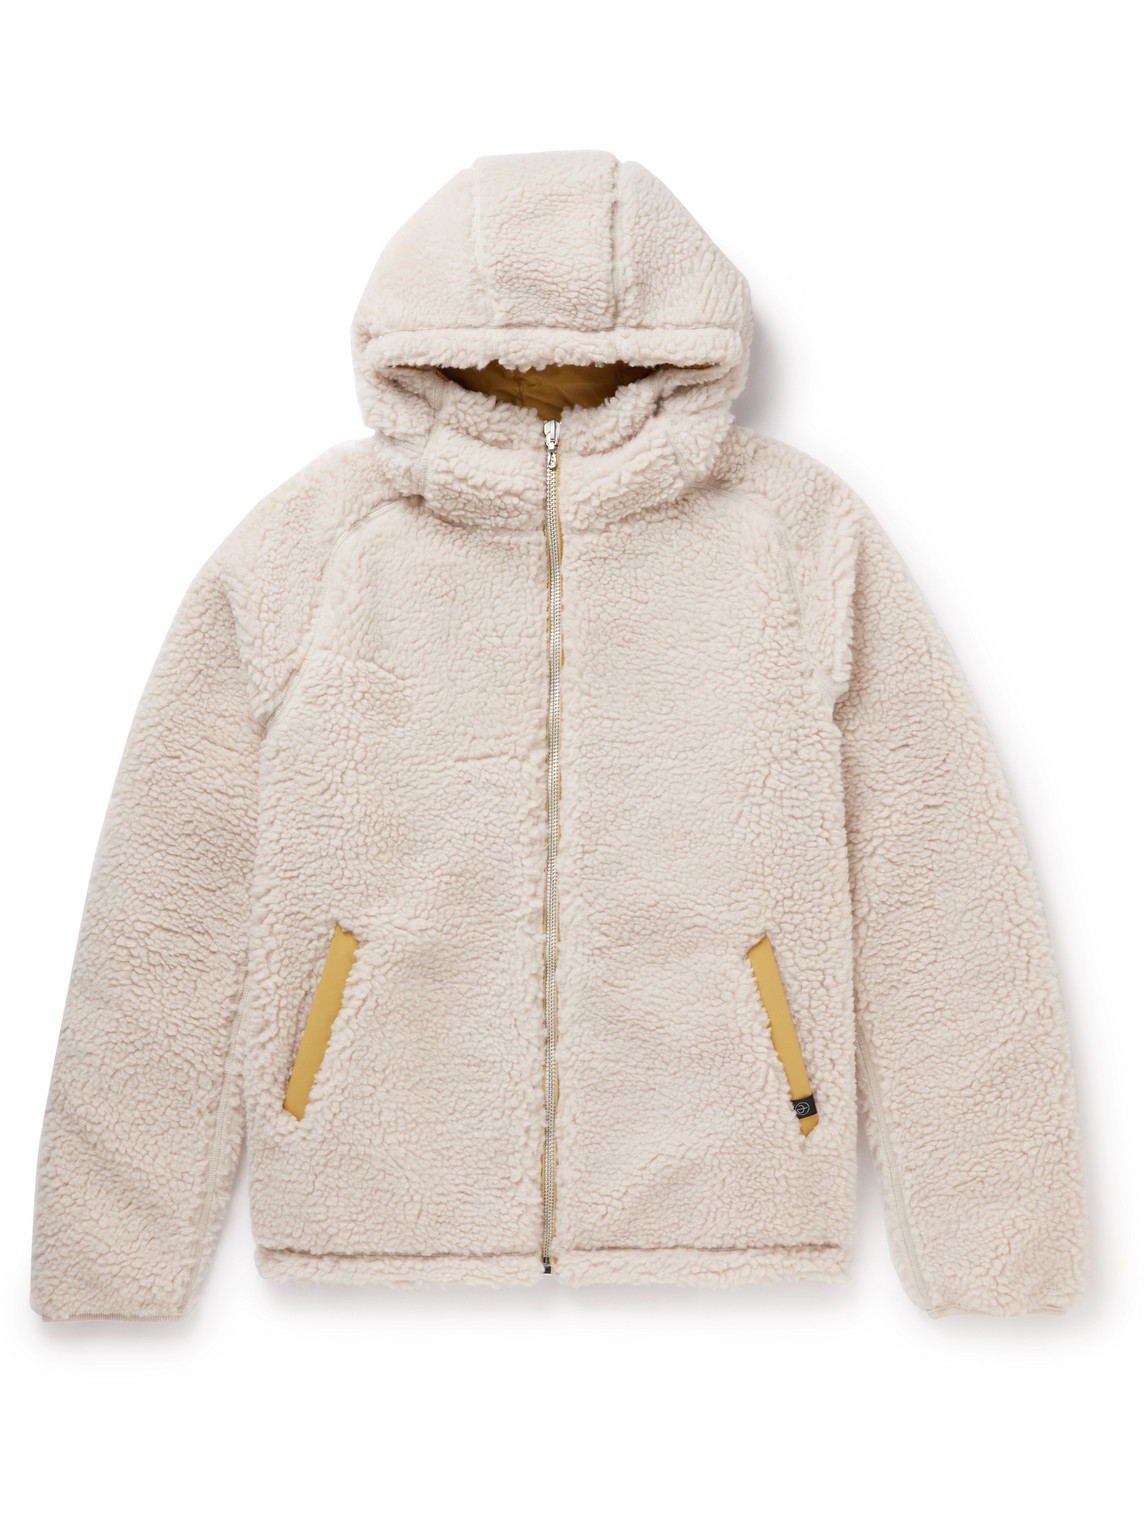 Shell-Trimmed Sherpa Hooded Jacket